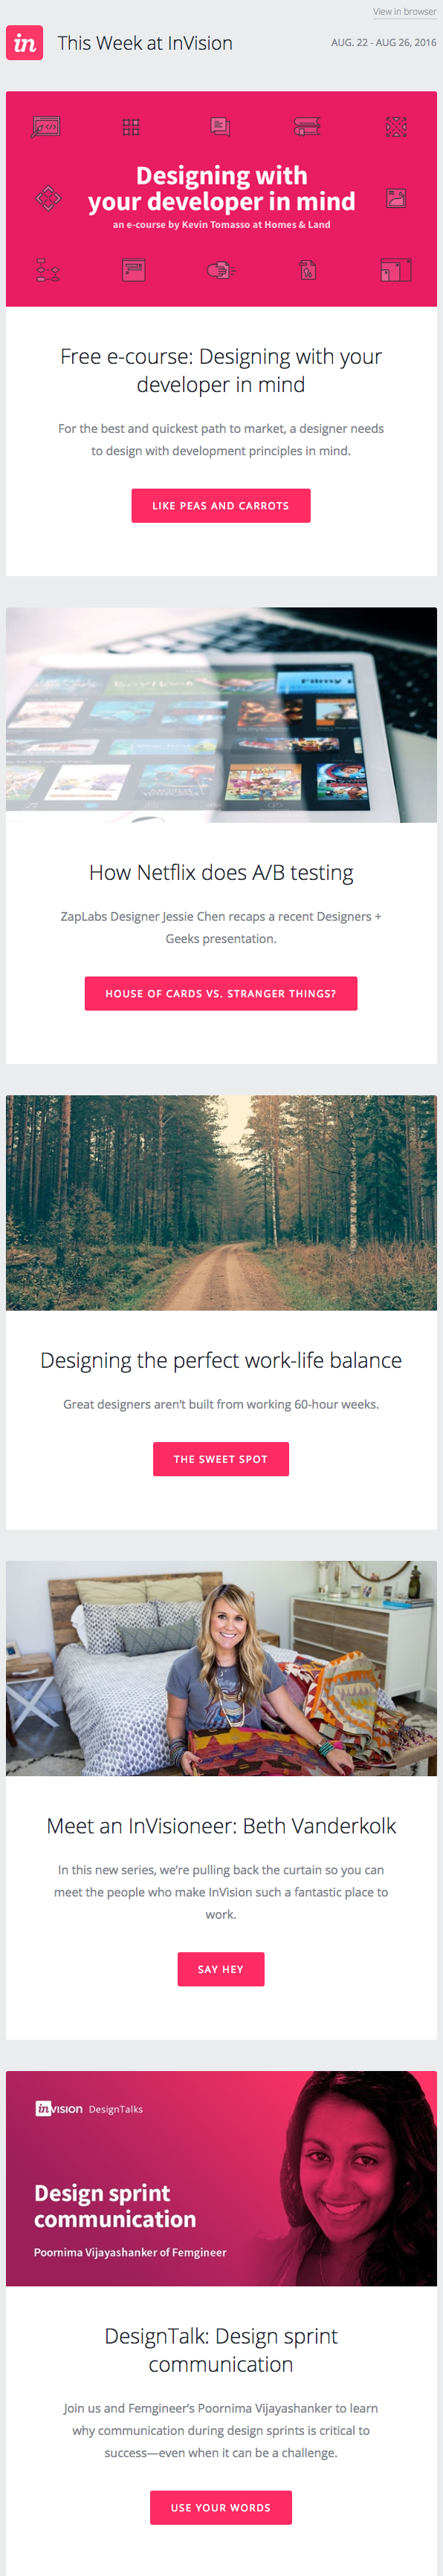 Email marketing campaign for the weekly blog newsletter of InVision